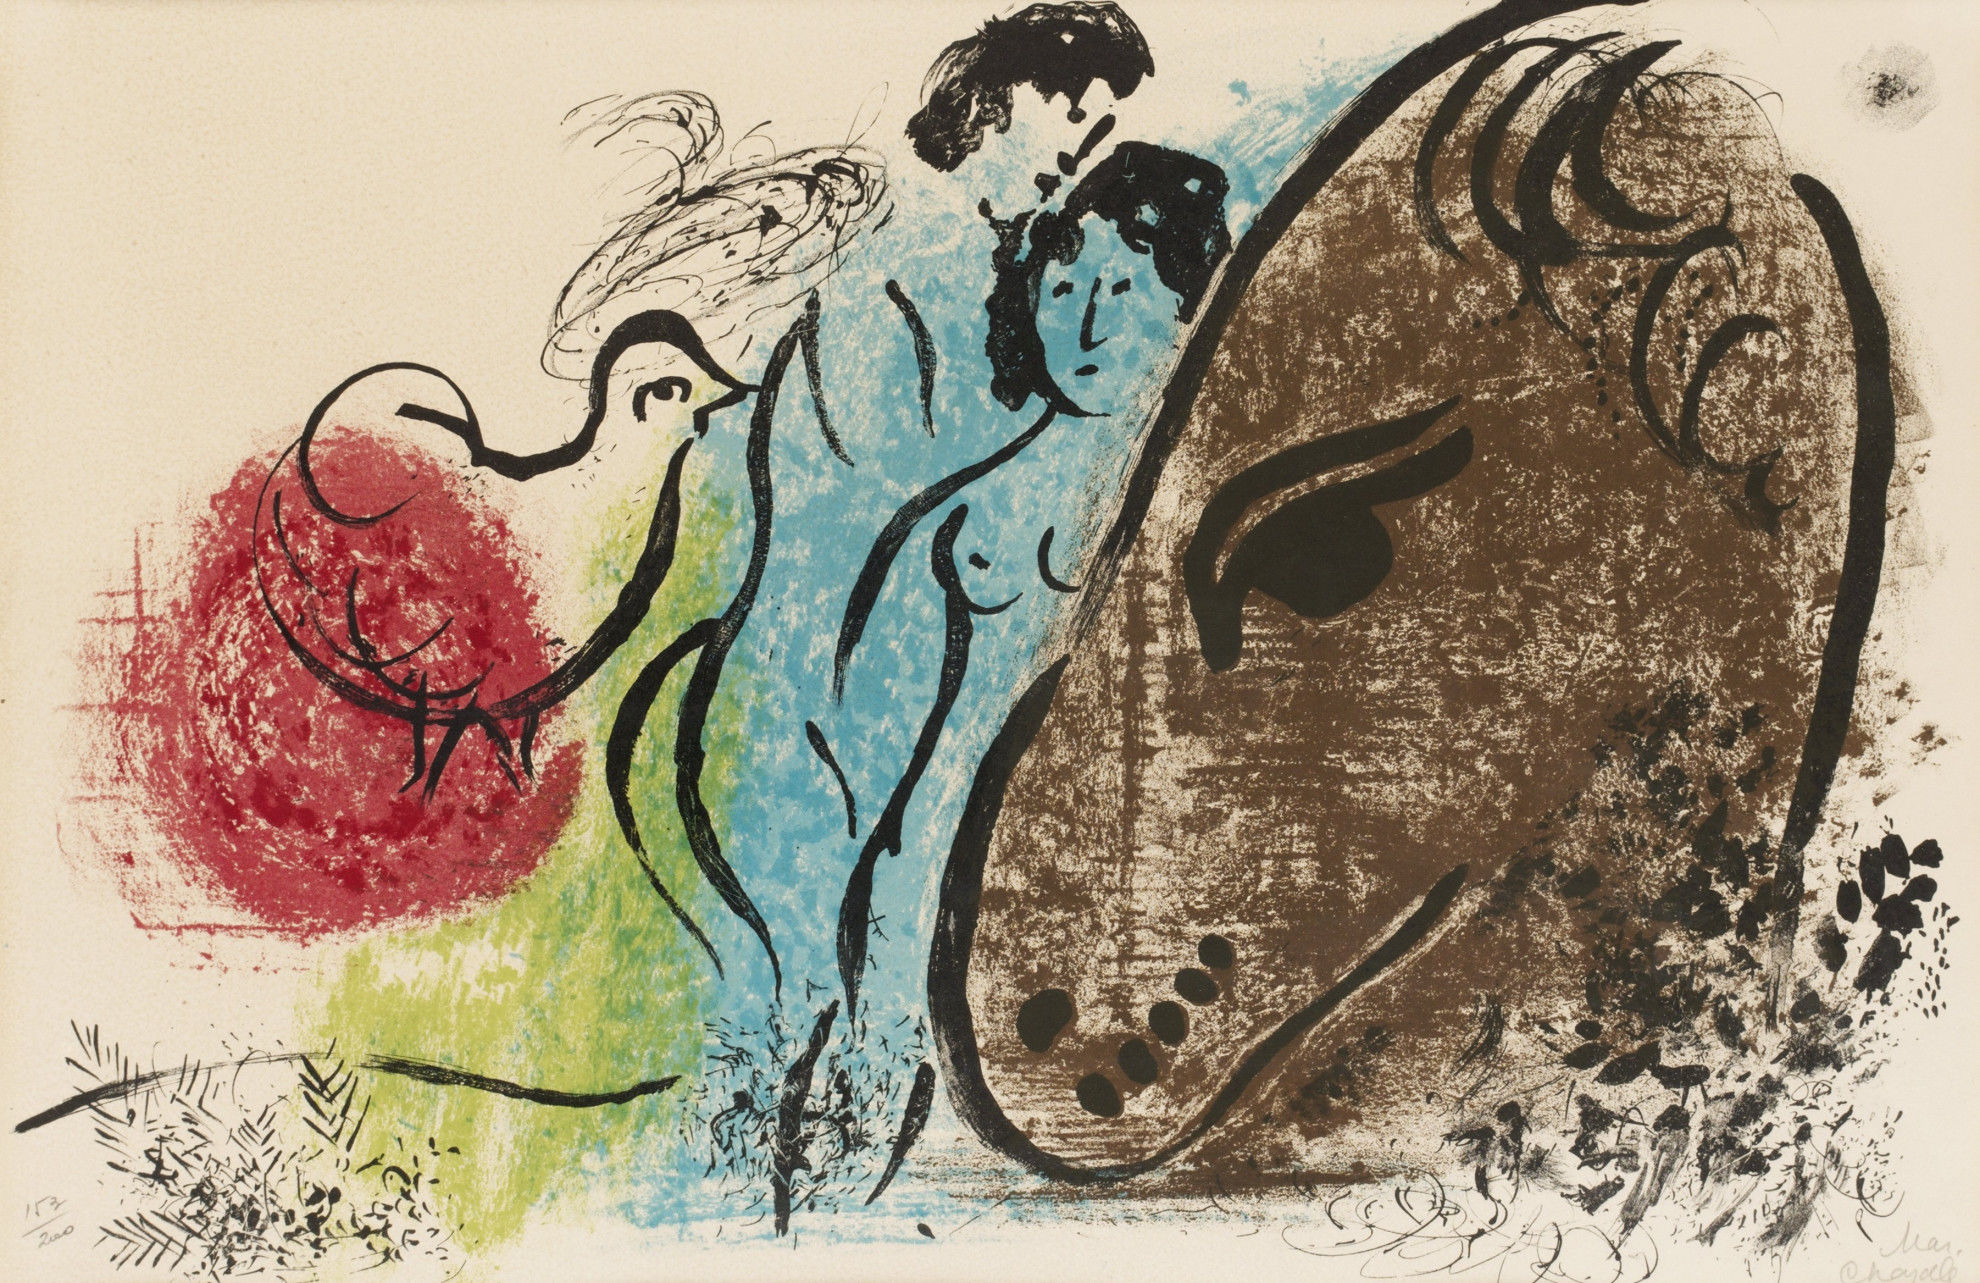  Le Cheval Brun lithograph by artist Marc Chagall titled